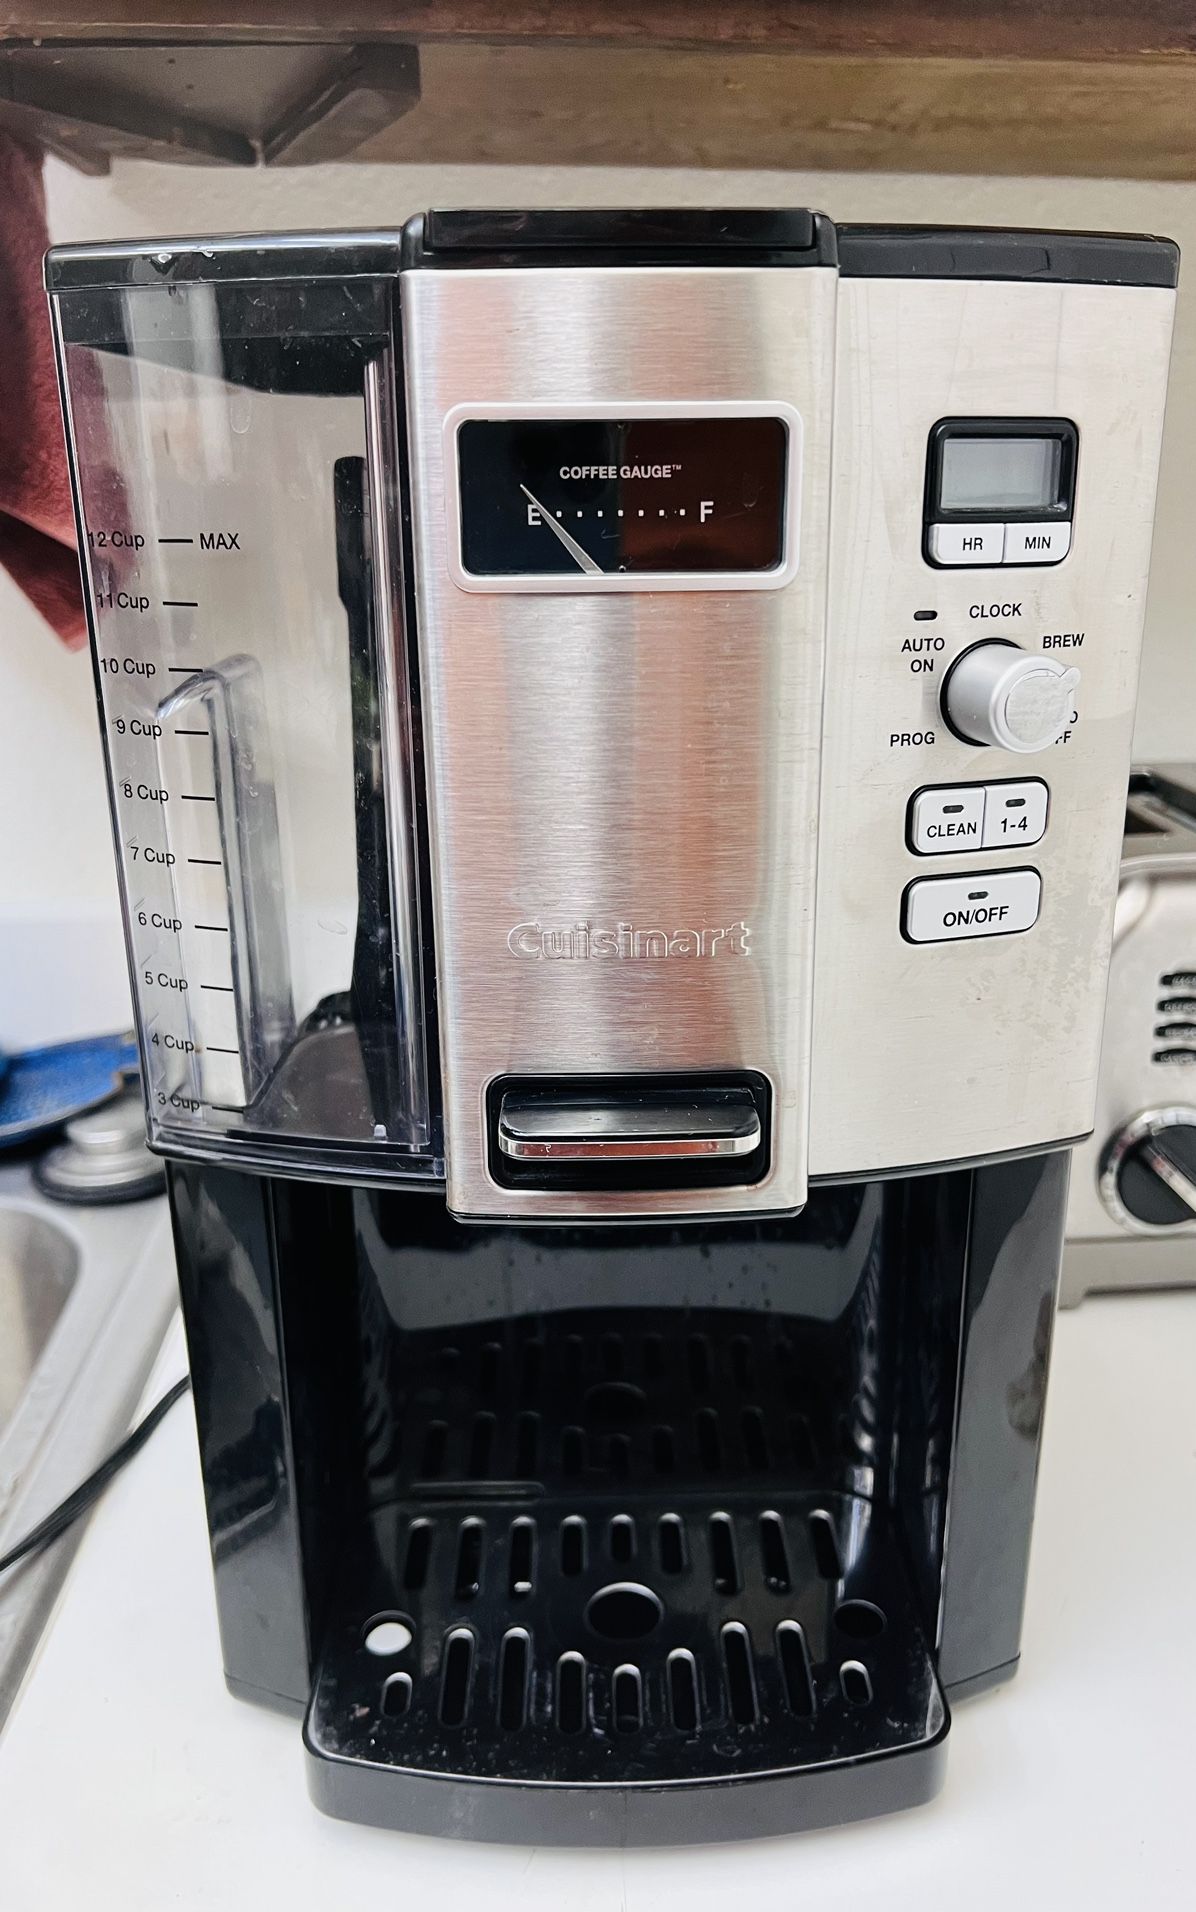 Cuisinart Coffee Maker, 12 Cup Programmable Drip, DCC-3000P1, Black